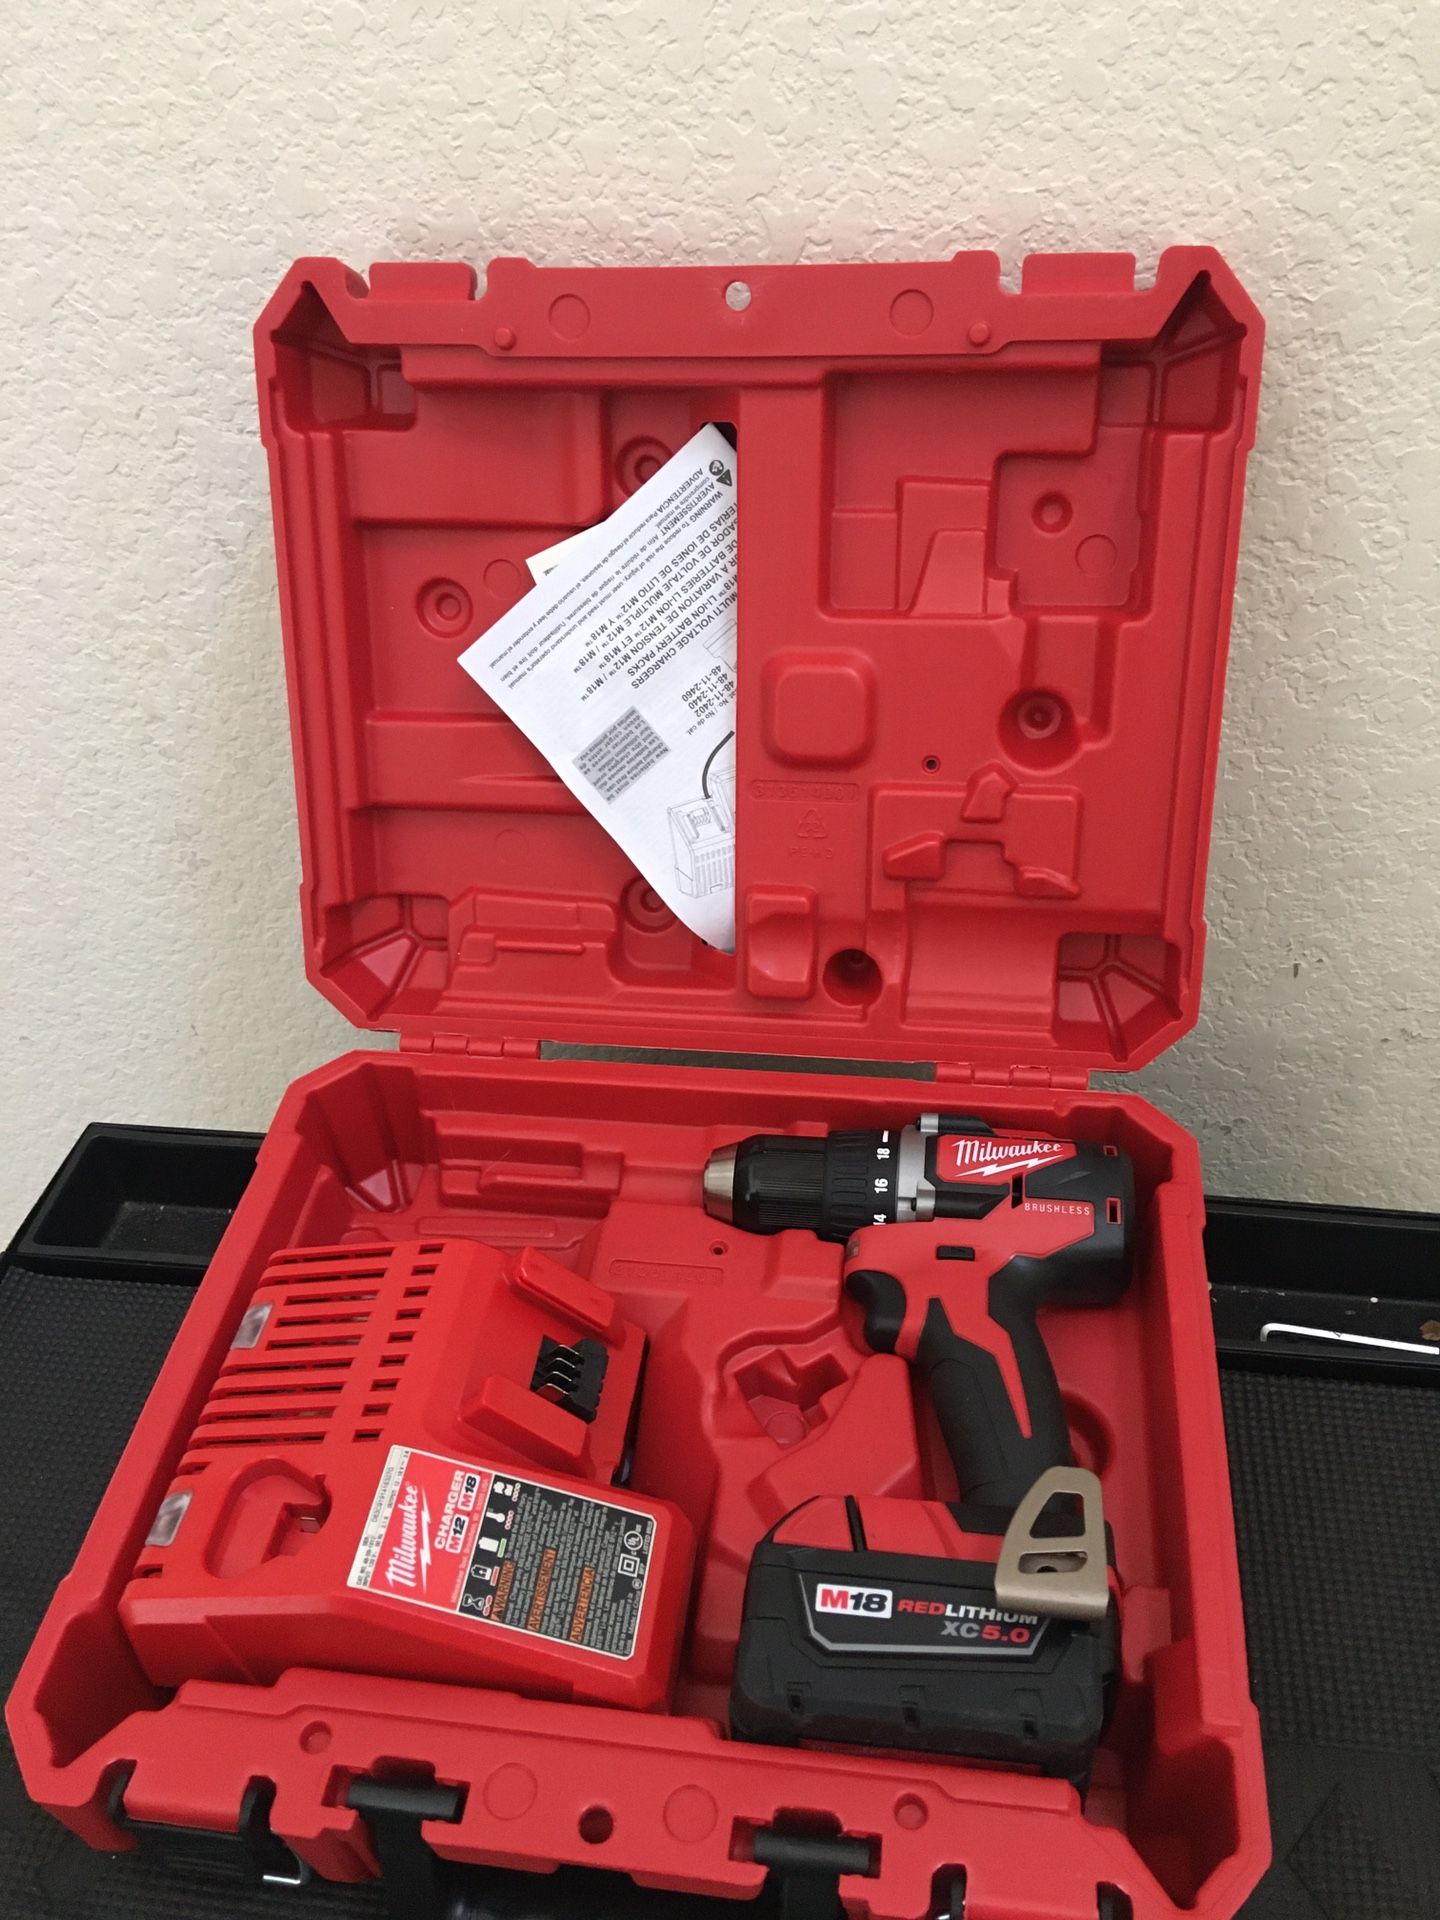 NEW MILWAUKEE M18 BRUSHLESS DRILL DRIVER/ BATTERY/ CHARGER